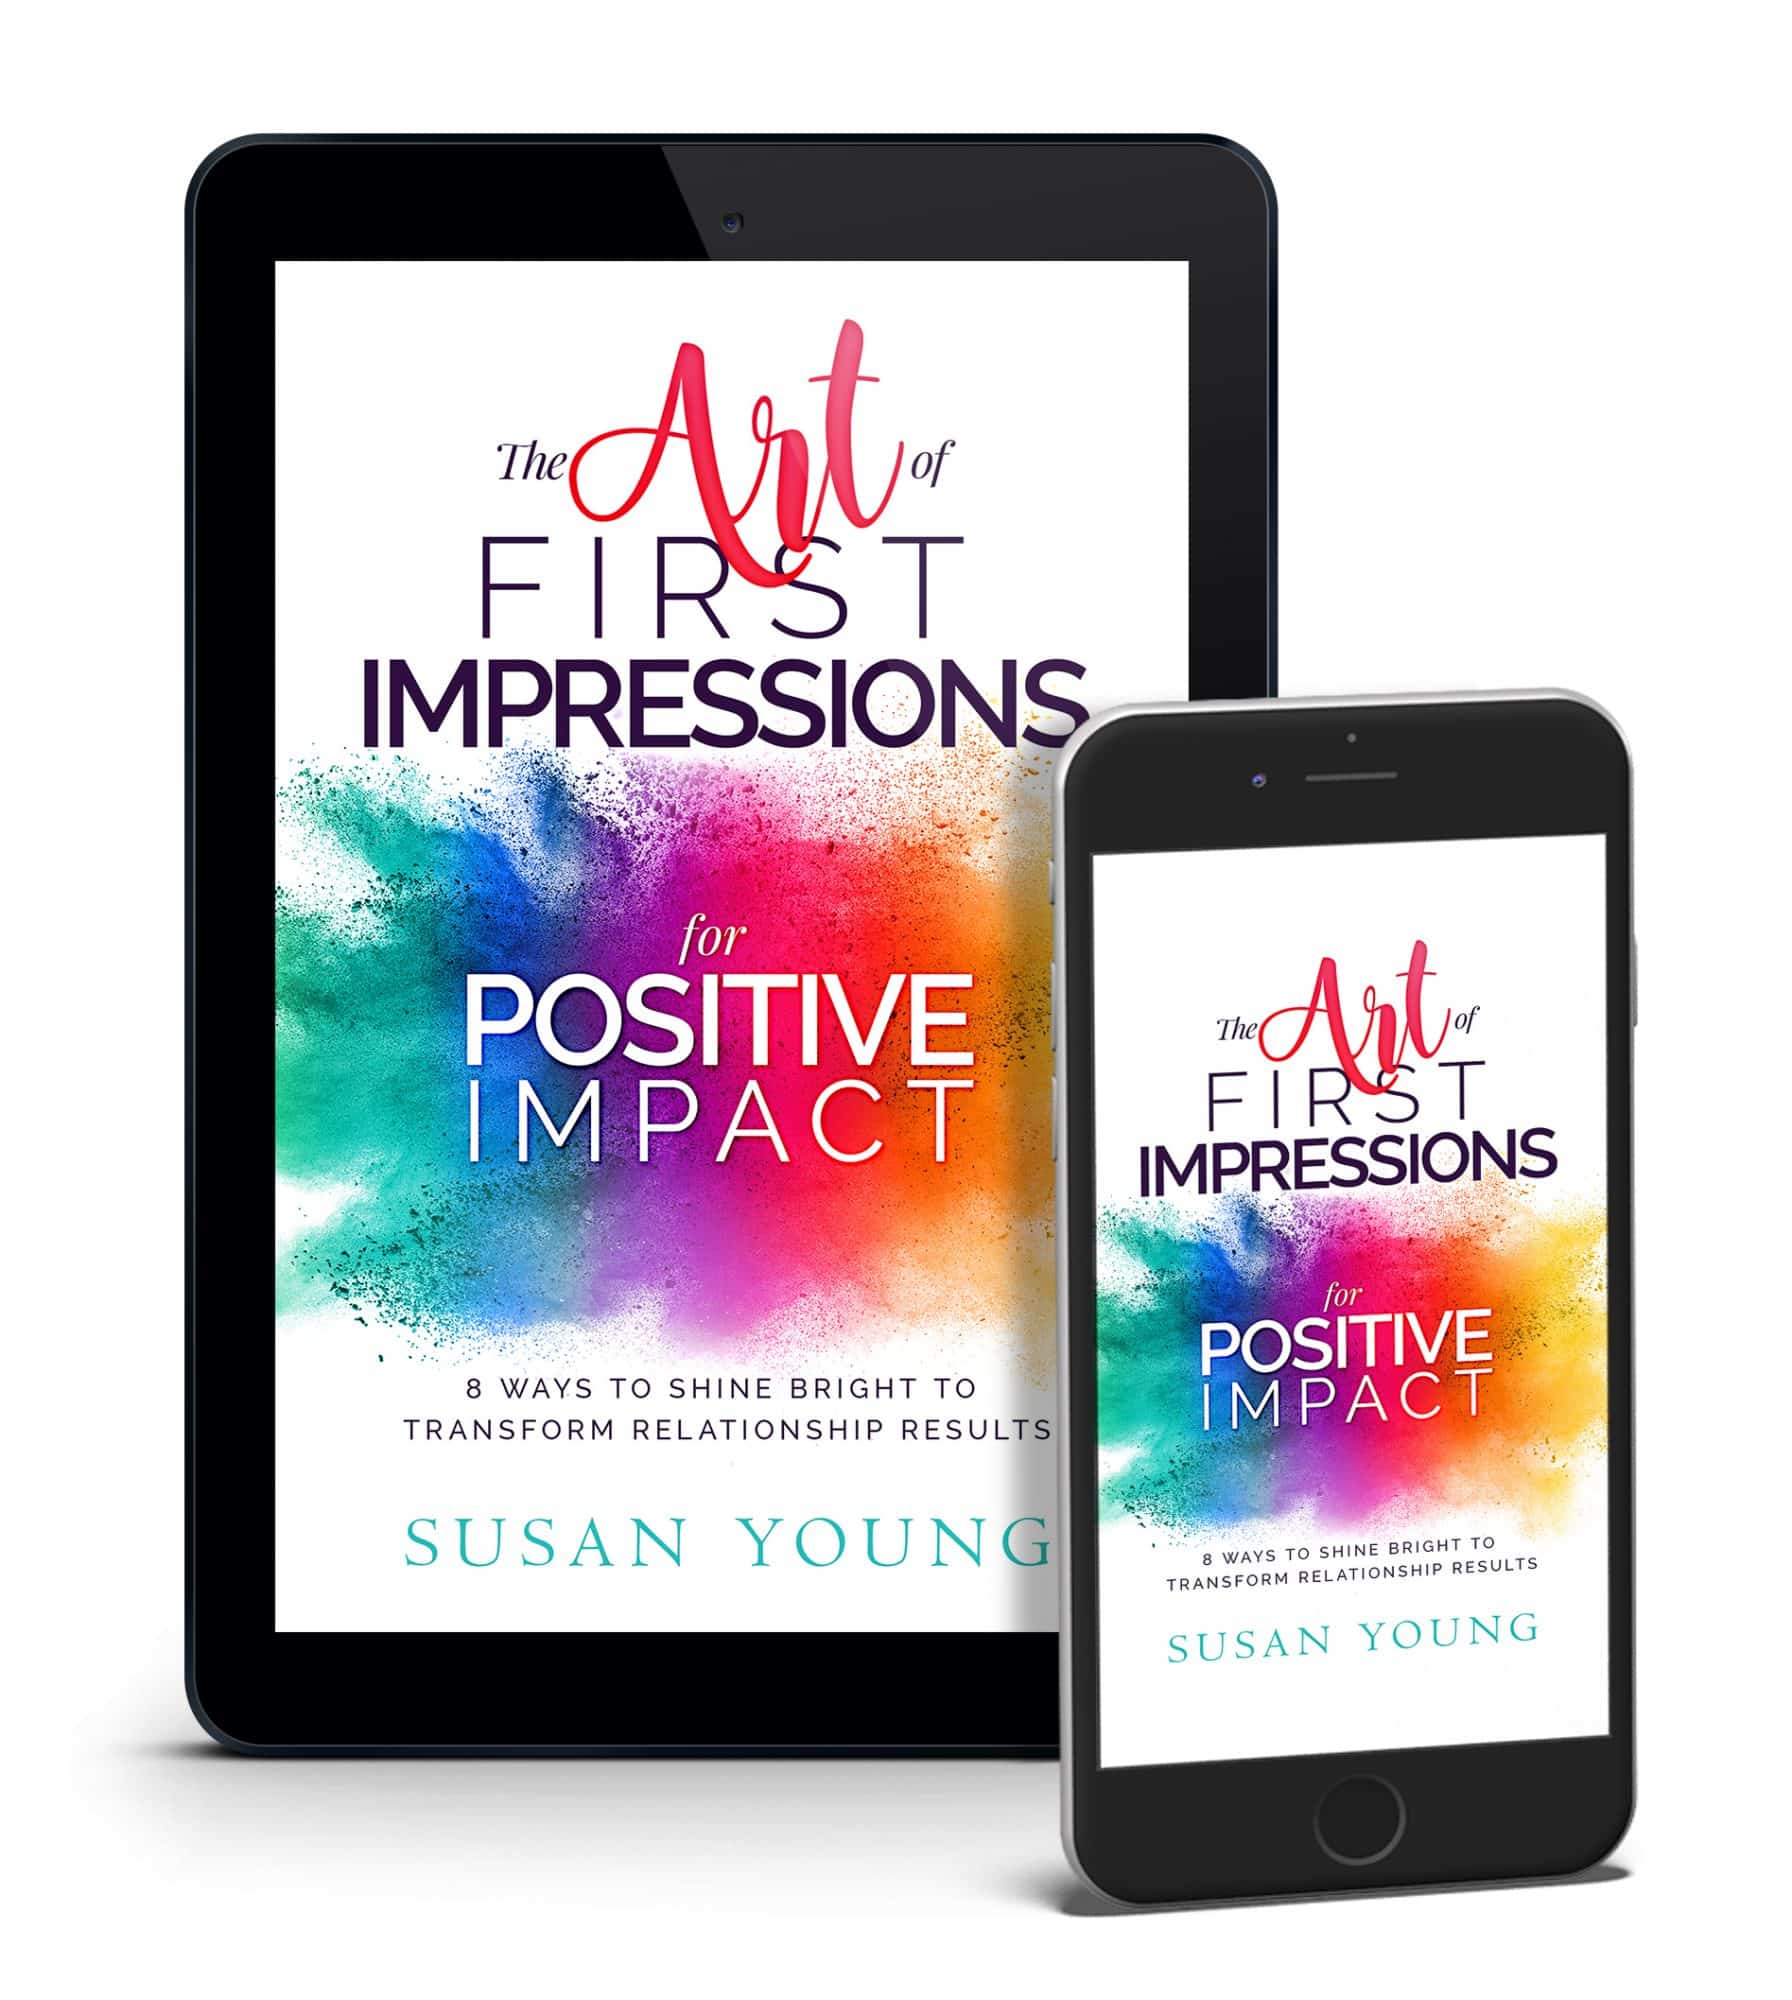 The Art of First Impressions for Positive Impact Book by Susan Young